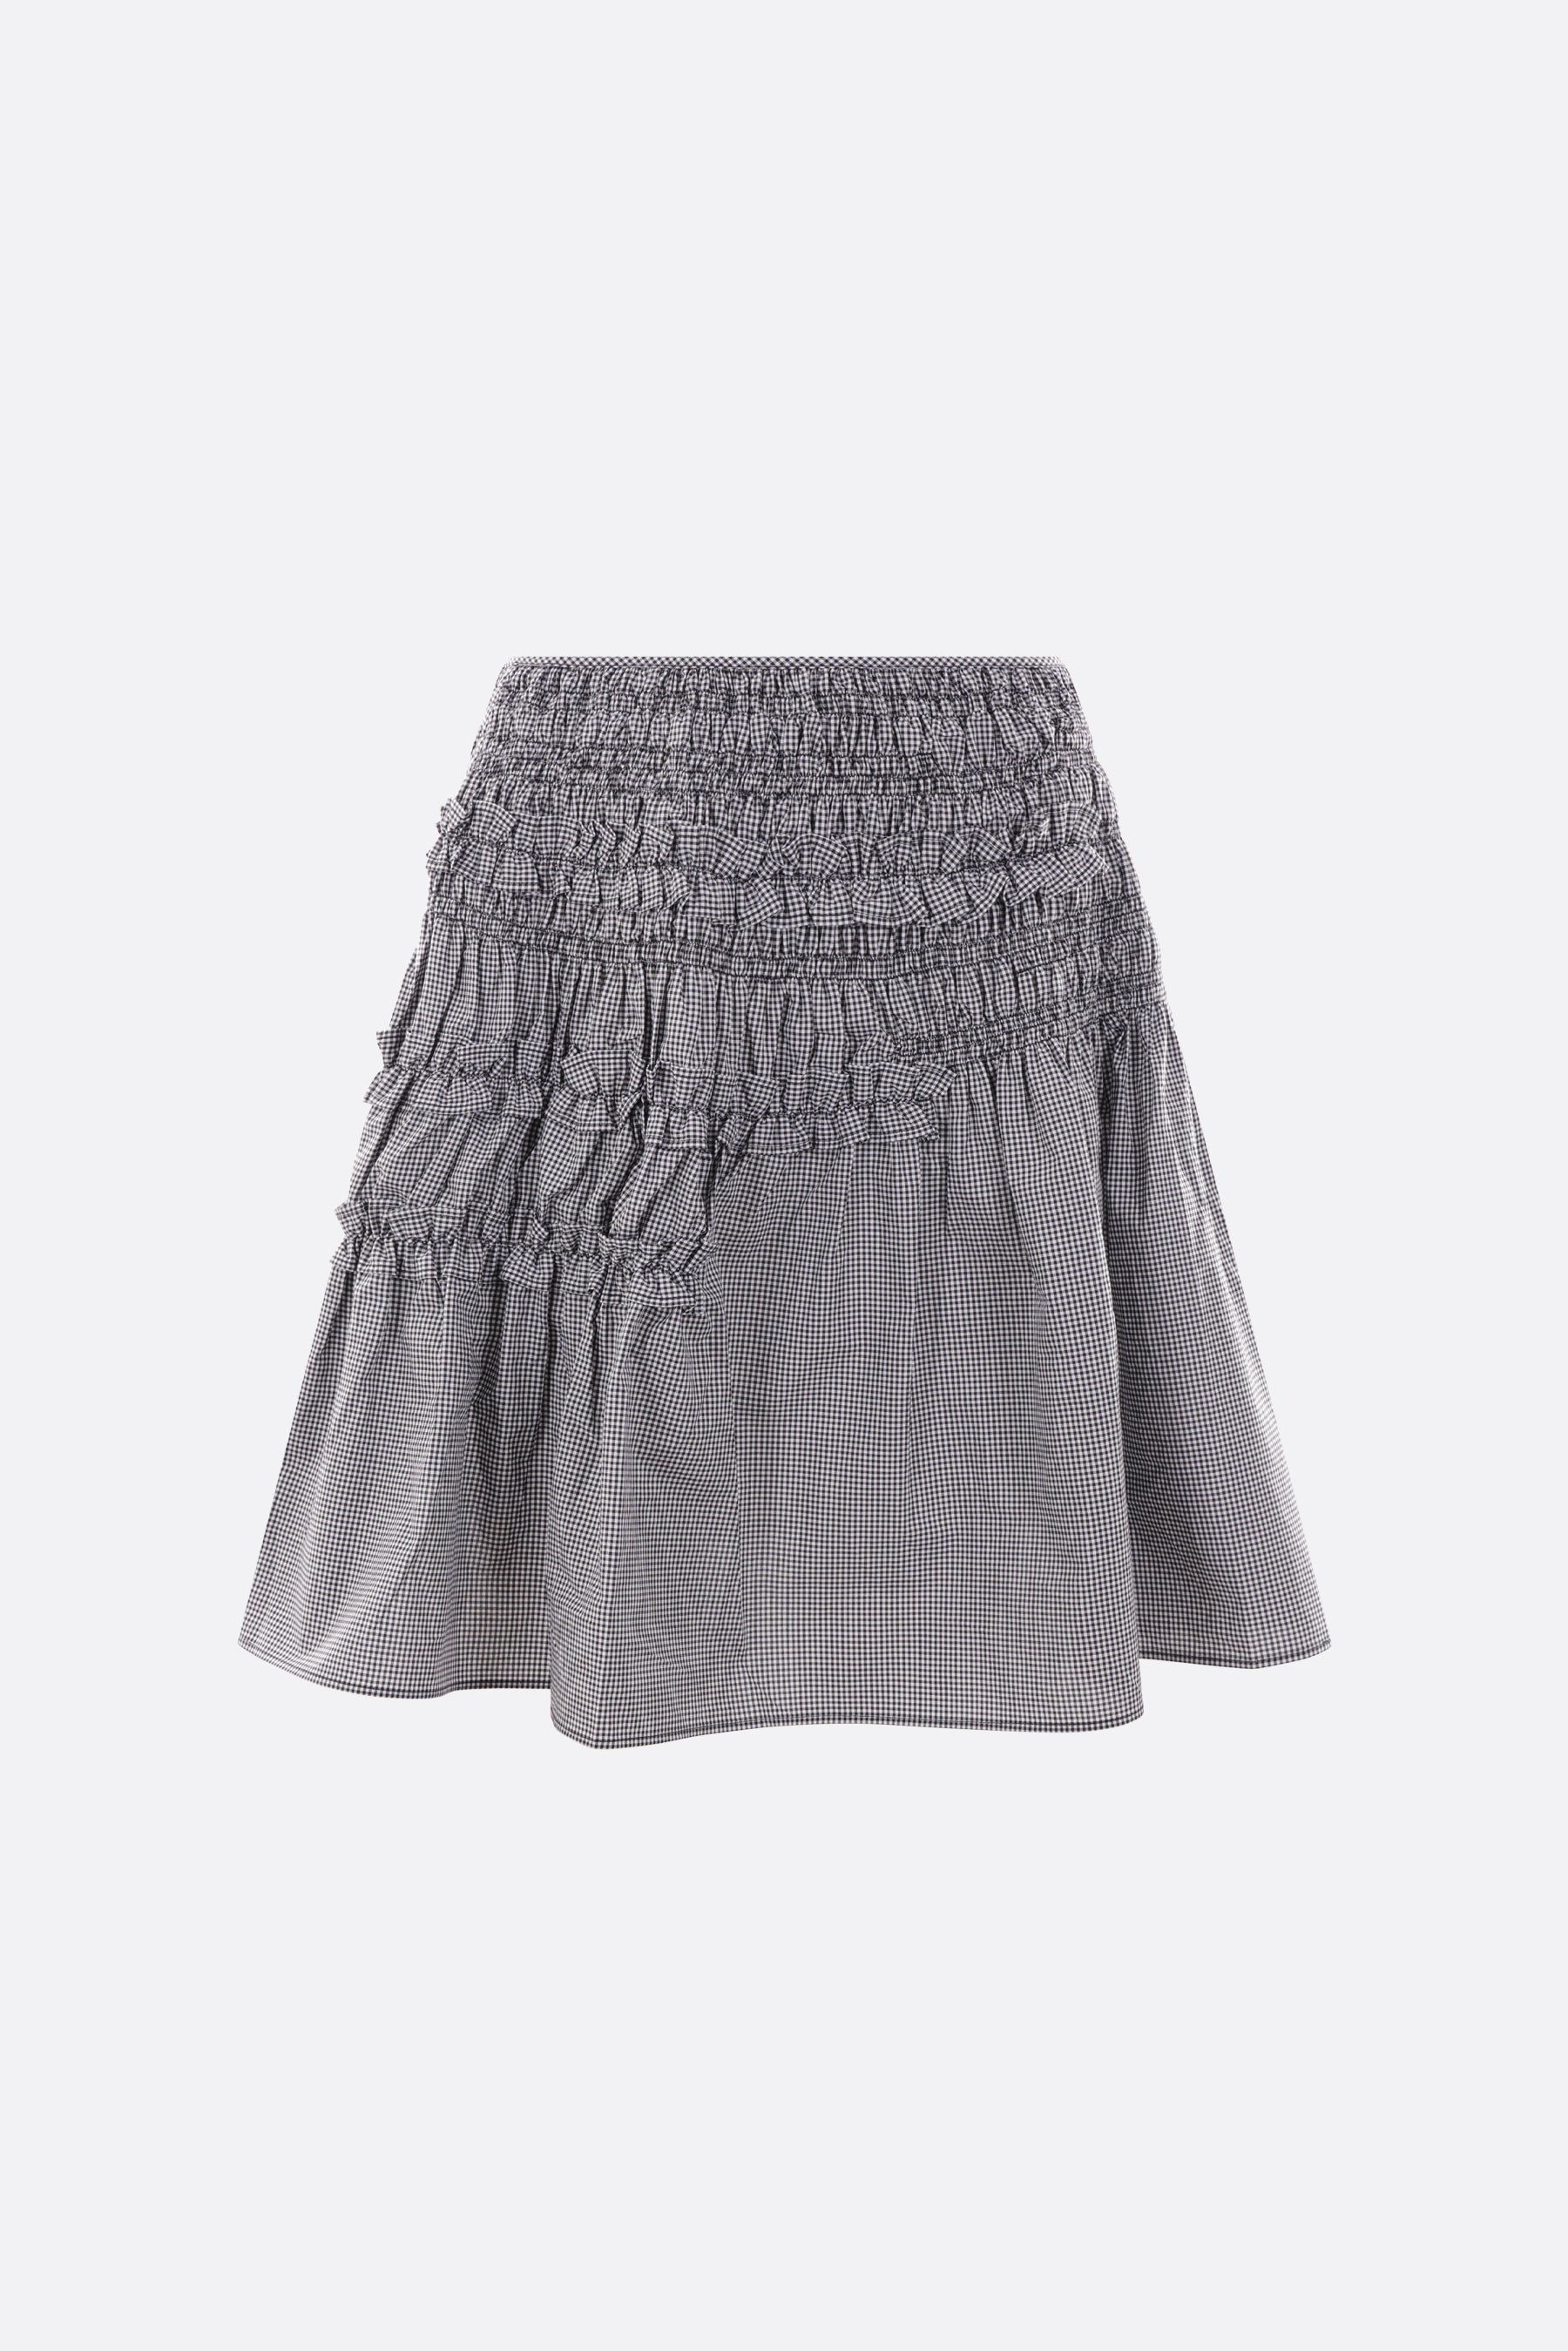 Giulia skirt in smocked and ruched Gingham cotton